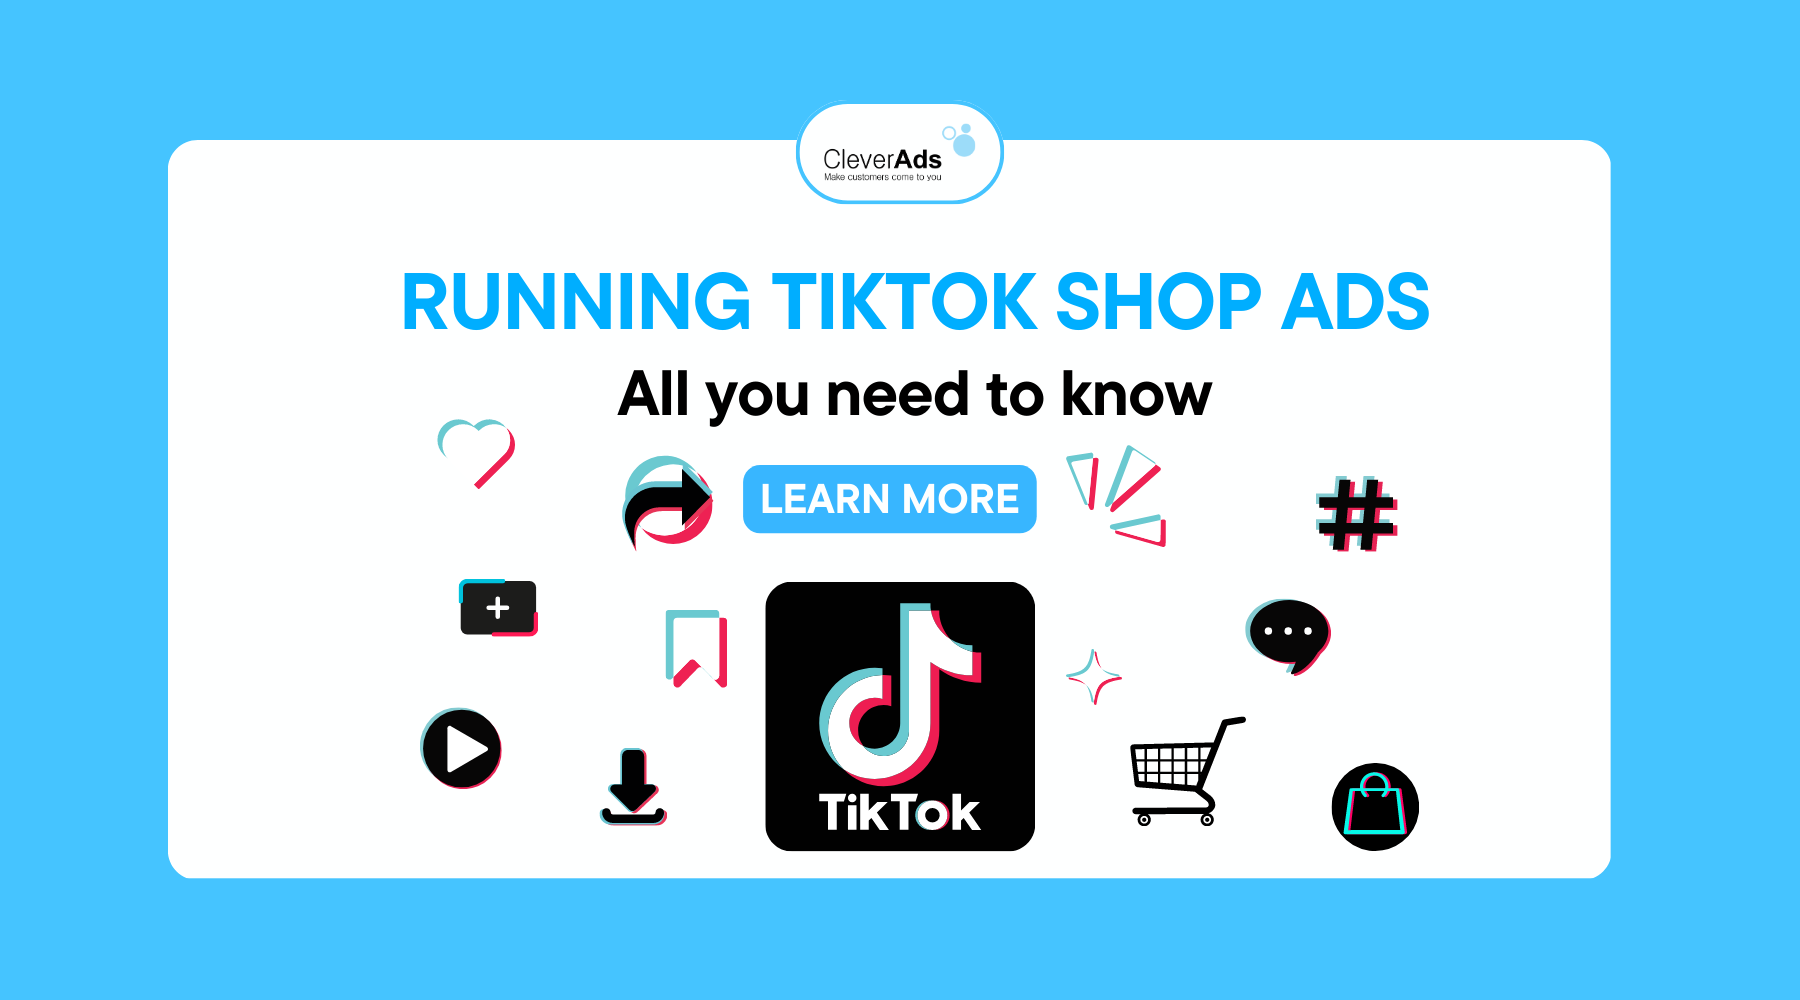 Running Tiktok Shop ads: All you need to know